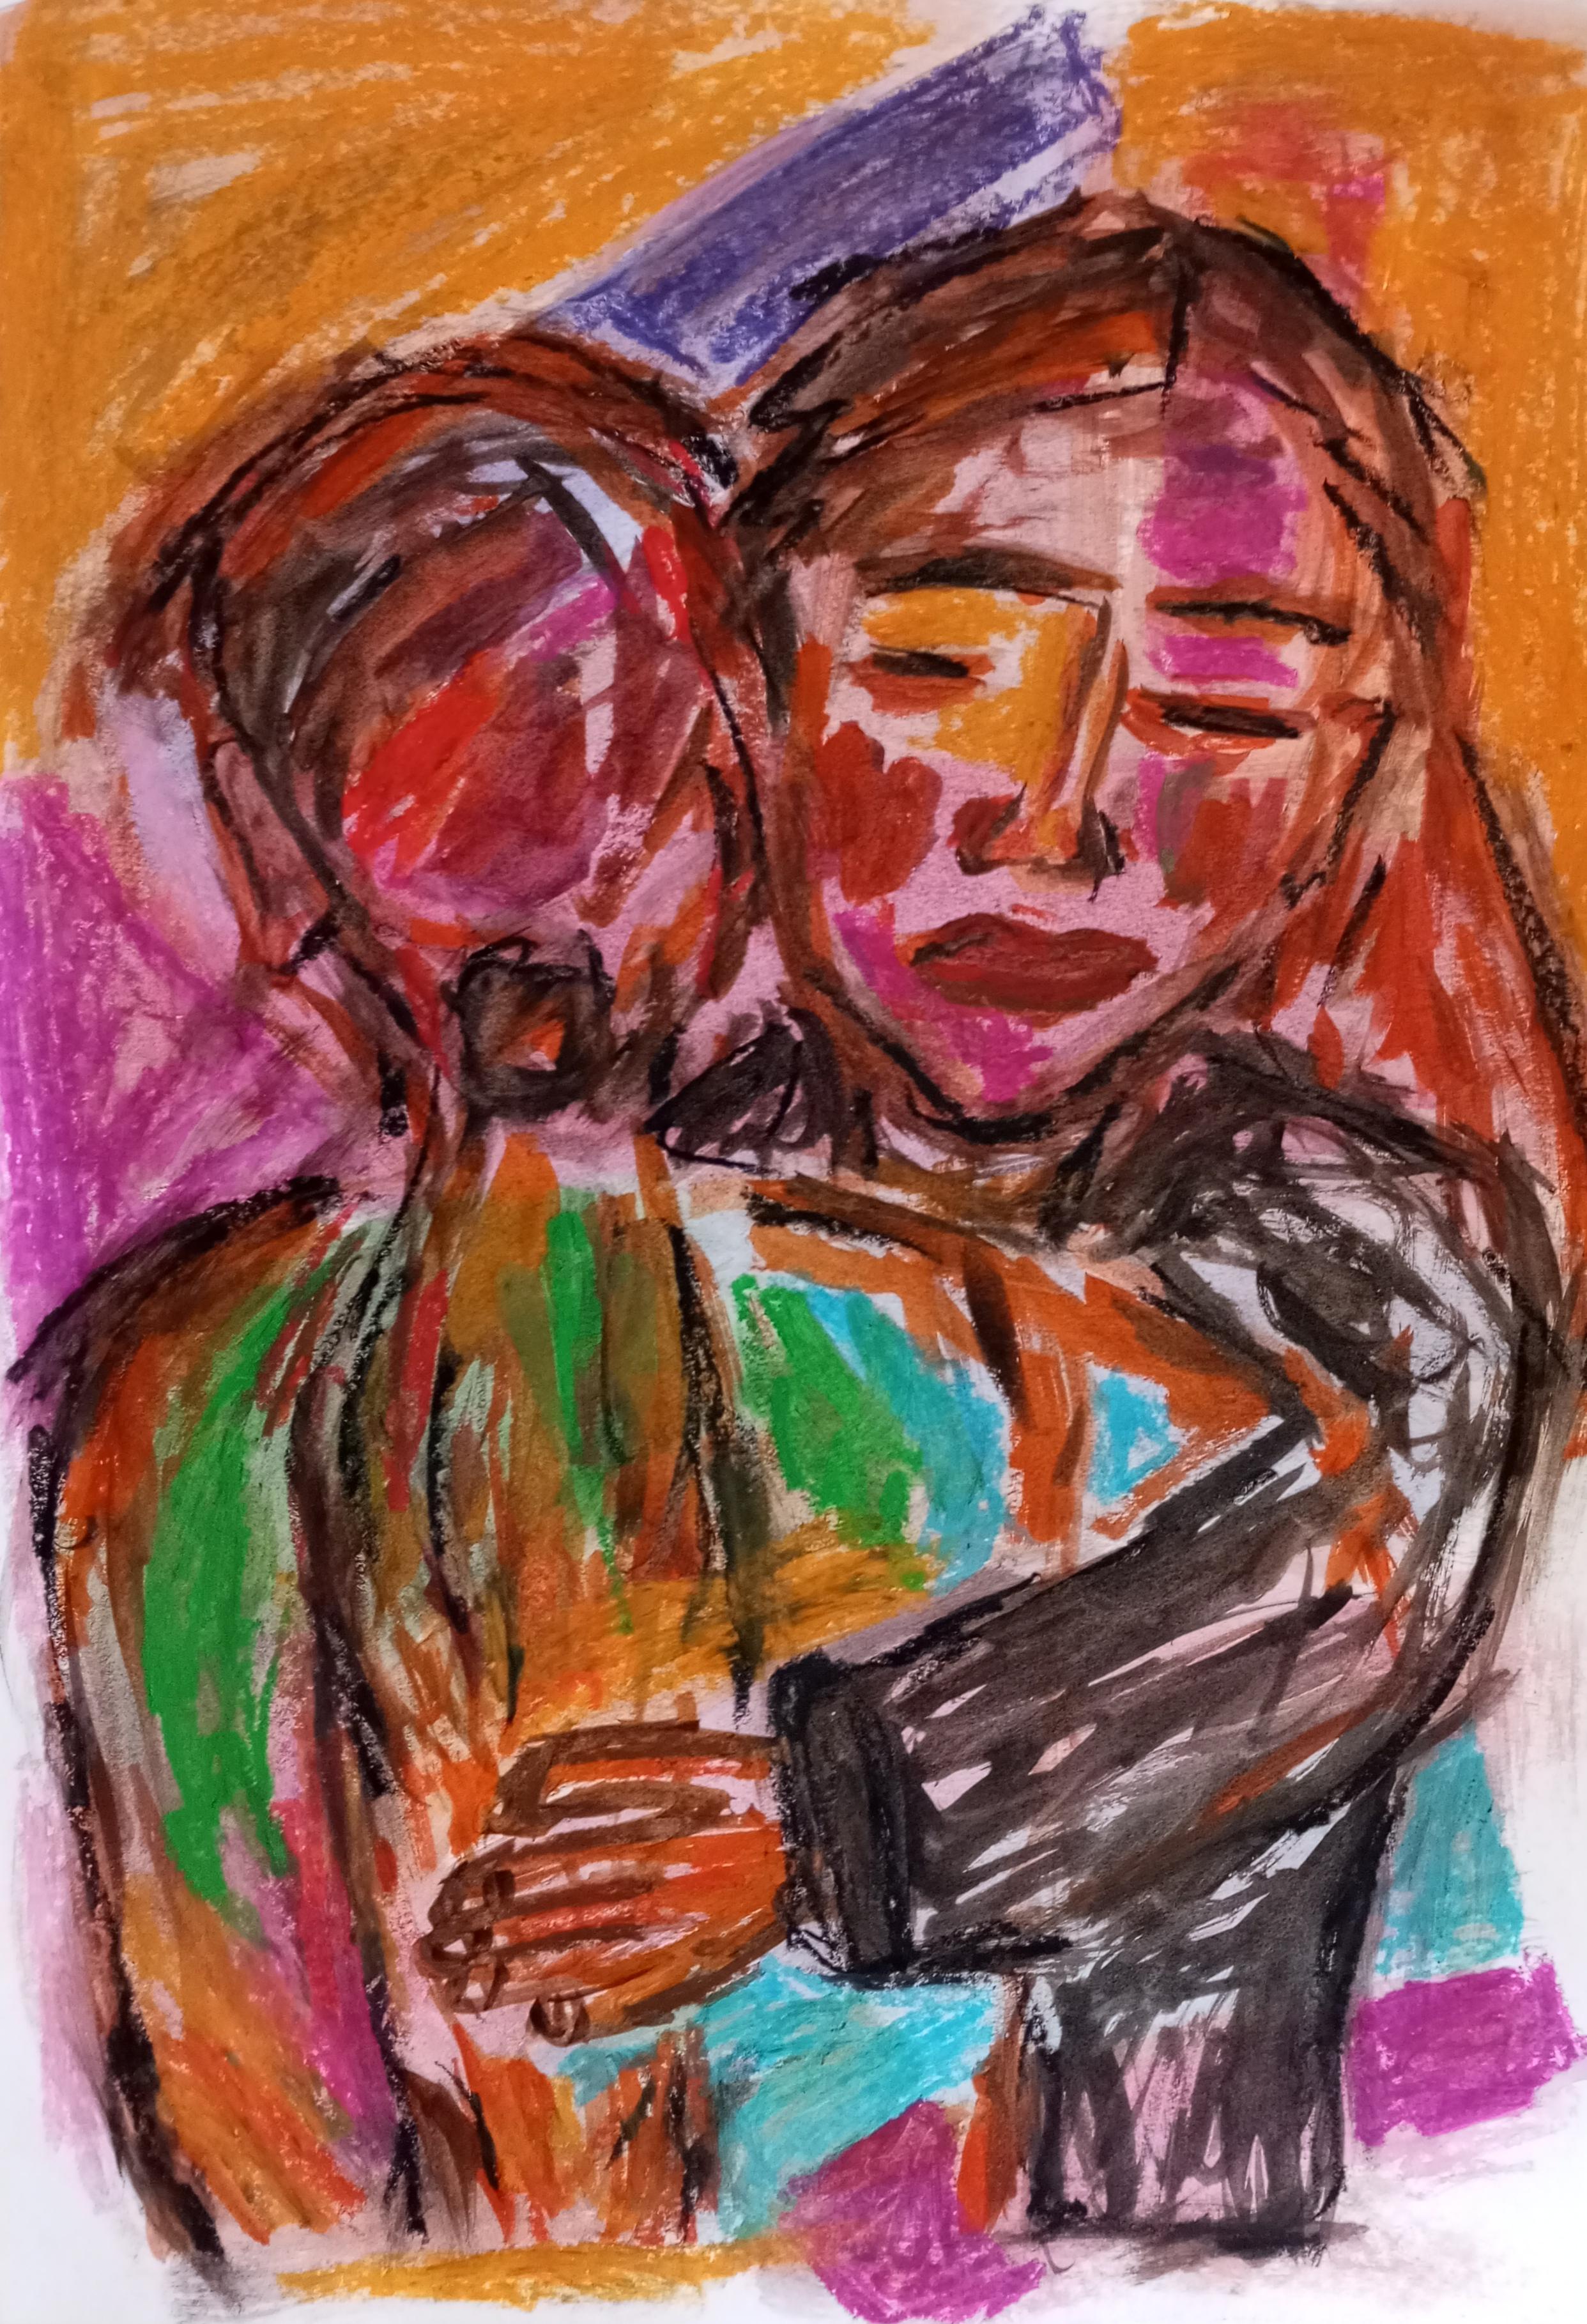 Natalya Mougenot  Figurative Art - Two women hugging each other painting on paper "You are my rock" 